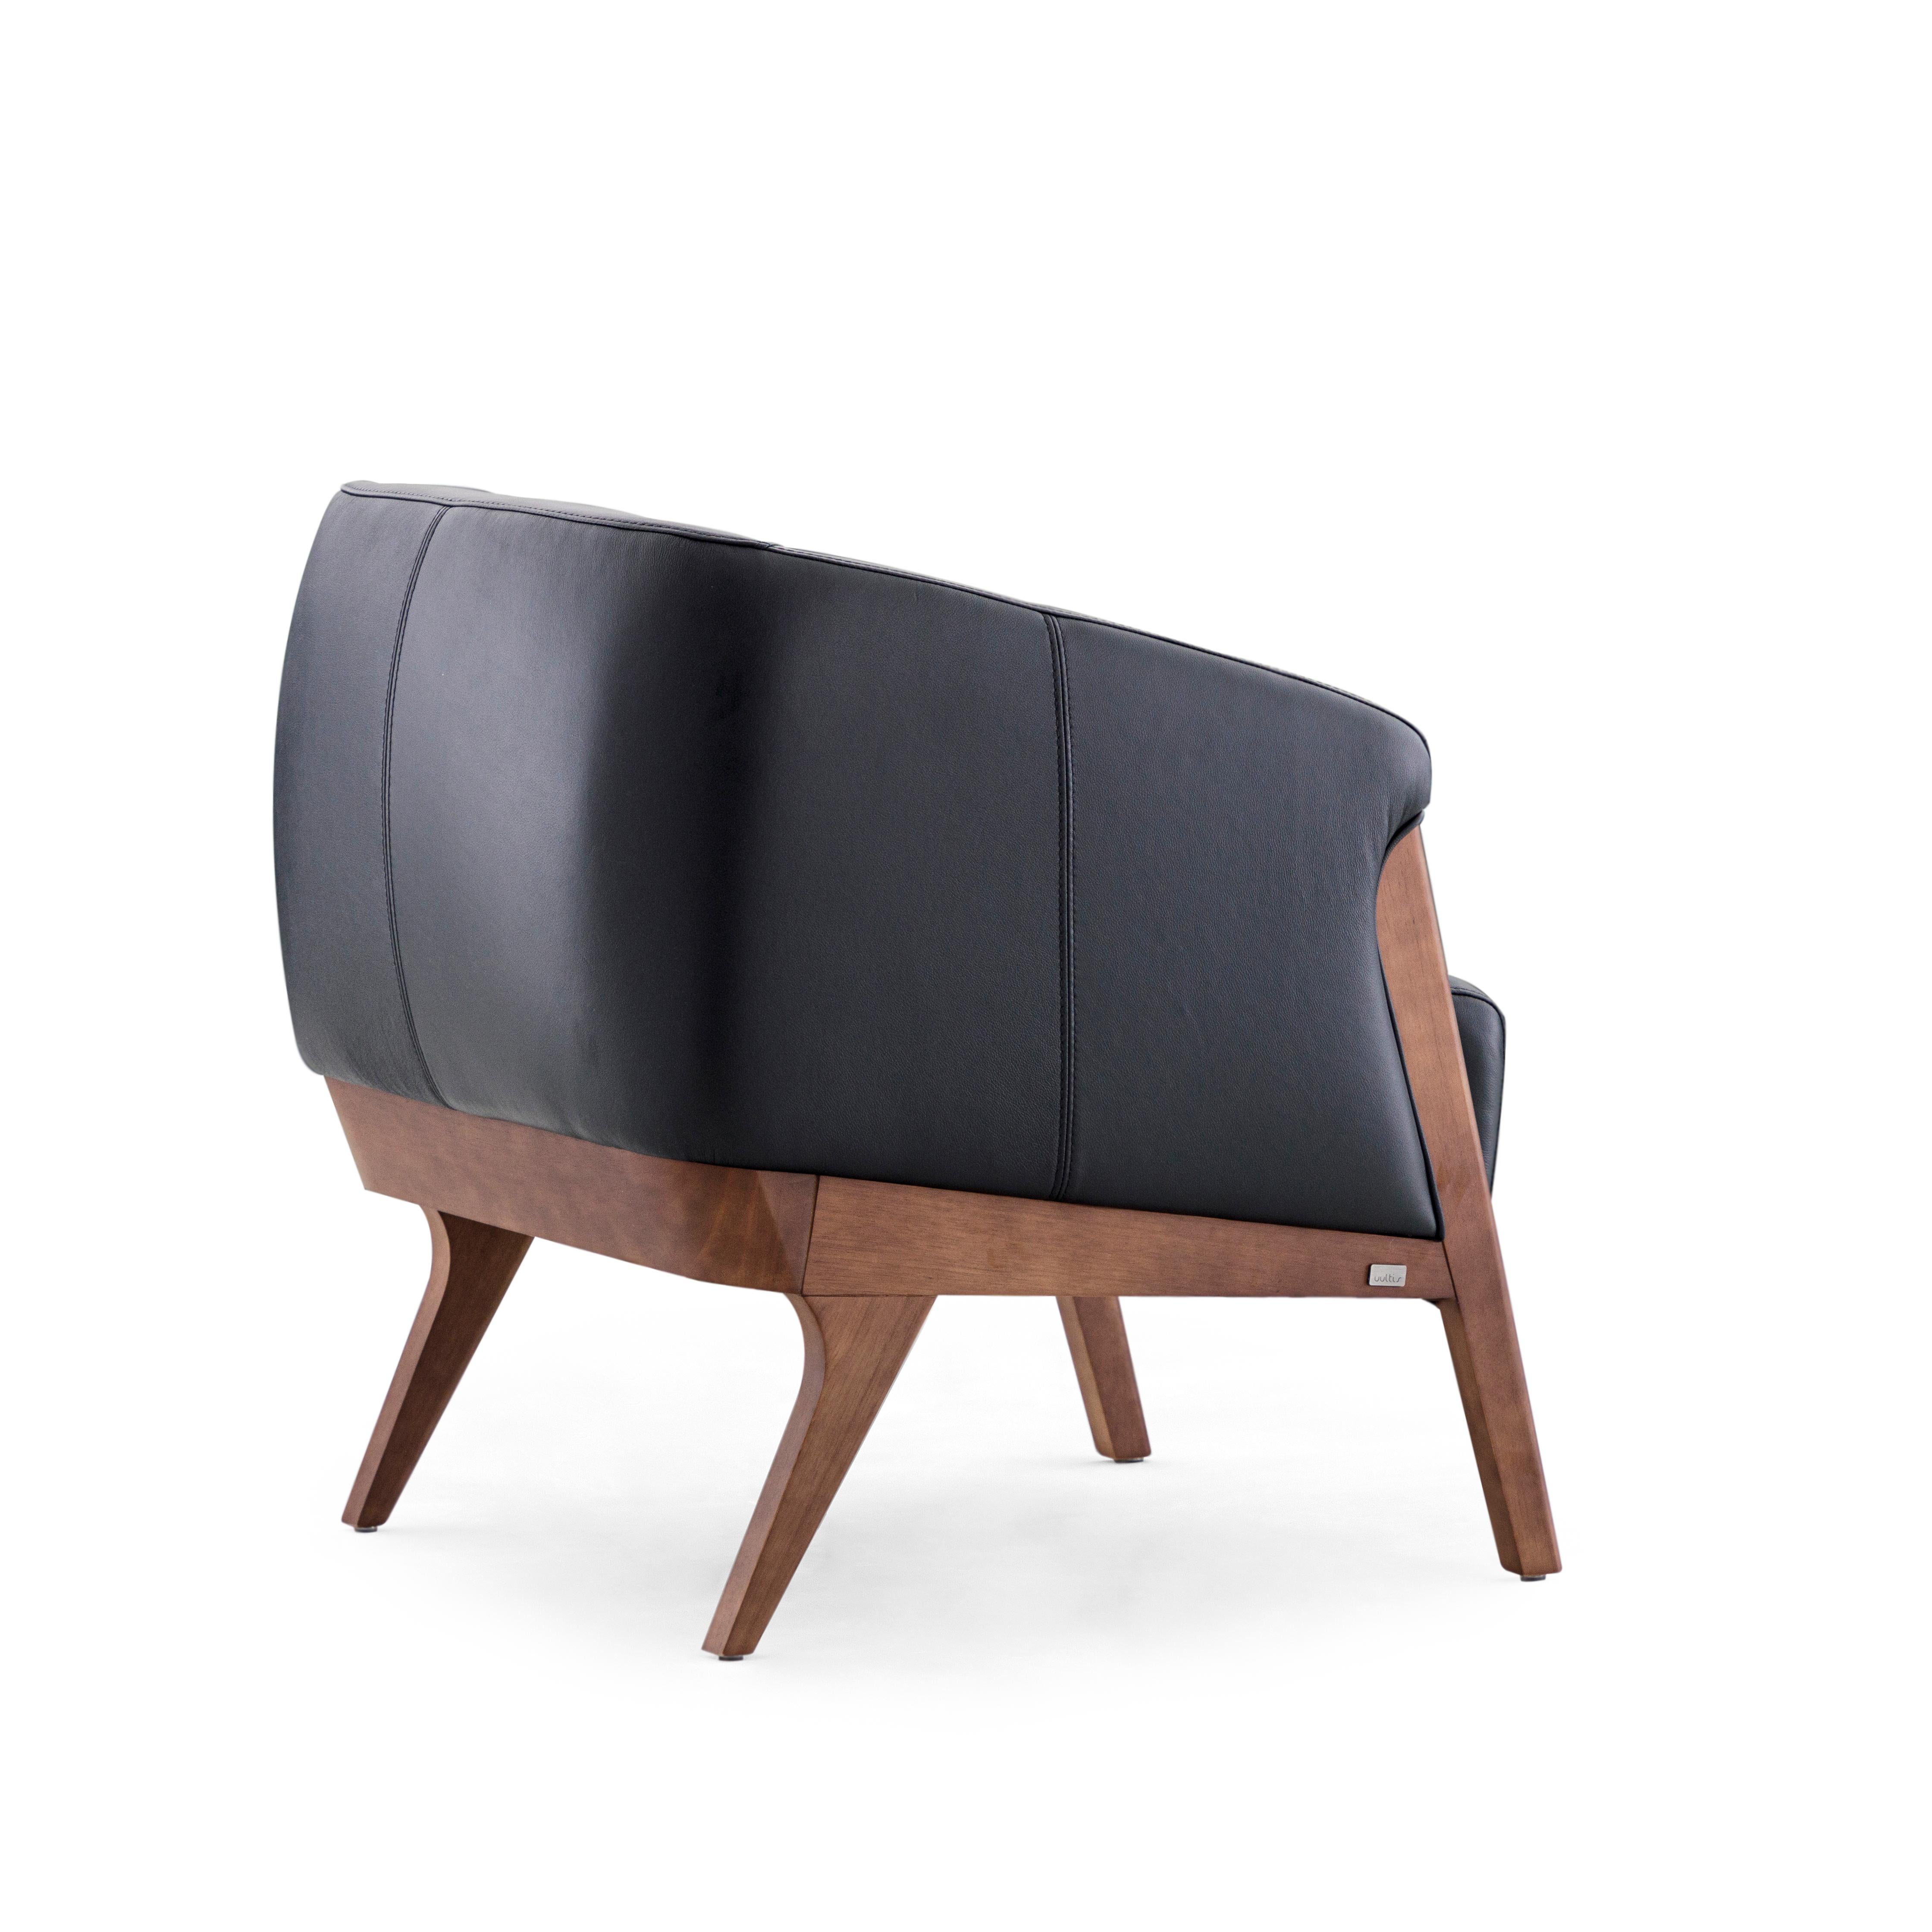 Brazilian Abra Armchair in Black Leather and Walnut Wood Finish For Sale